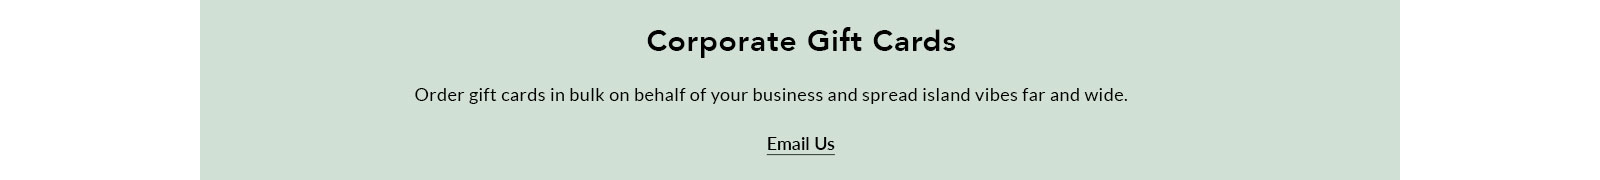 Corporate gift cards